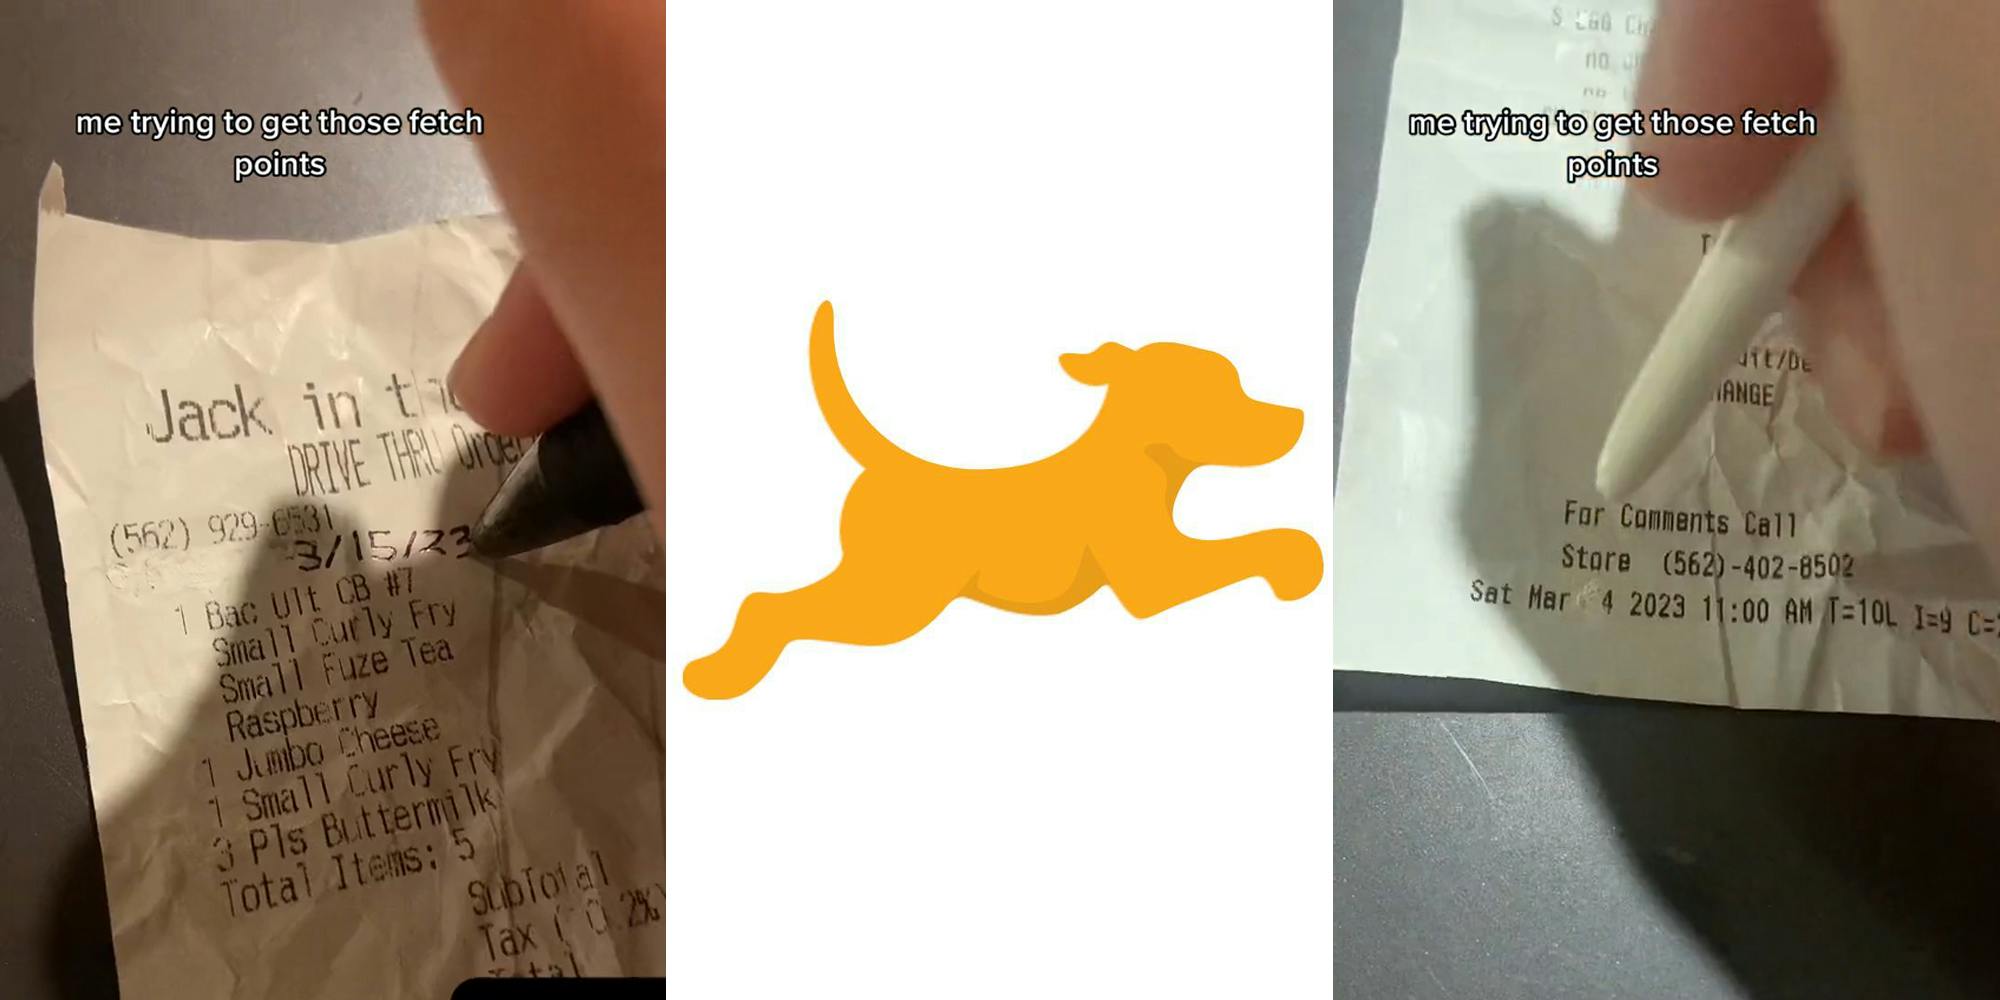 person using pen to change date on receipt with caption "me trying to get those fetch points" (l) Fetch yellow dog logo on white background (c) person using white pen to change date on receipt with caption "me trying to get those fetch points" (r)